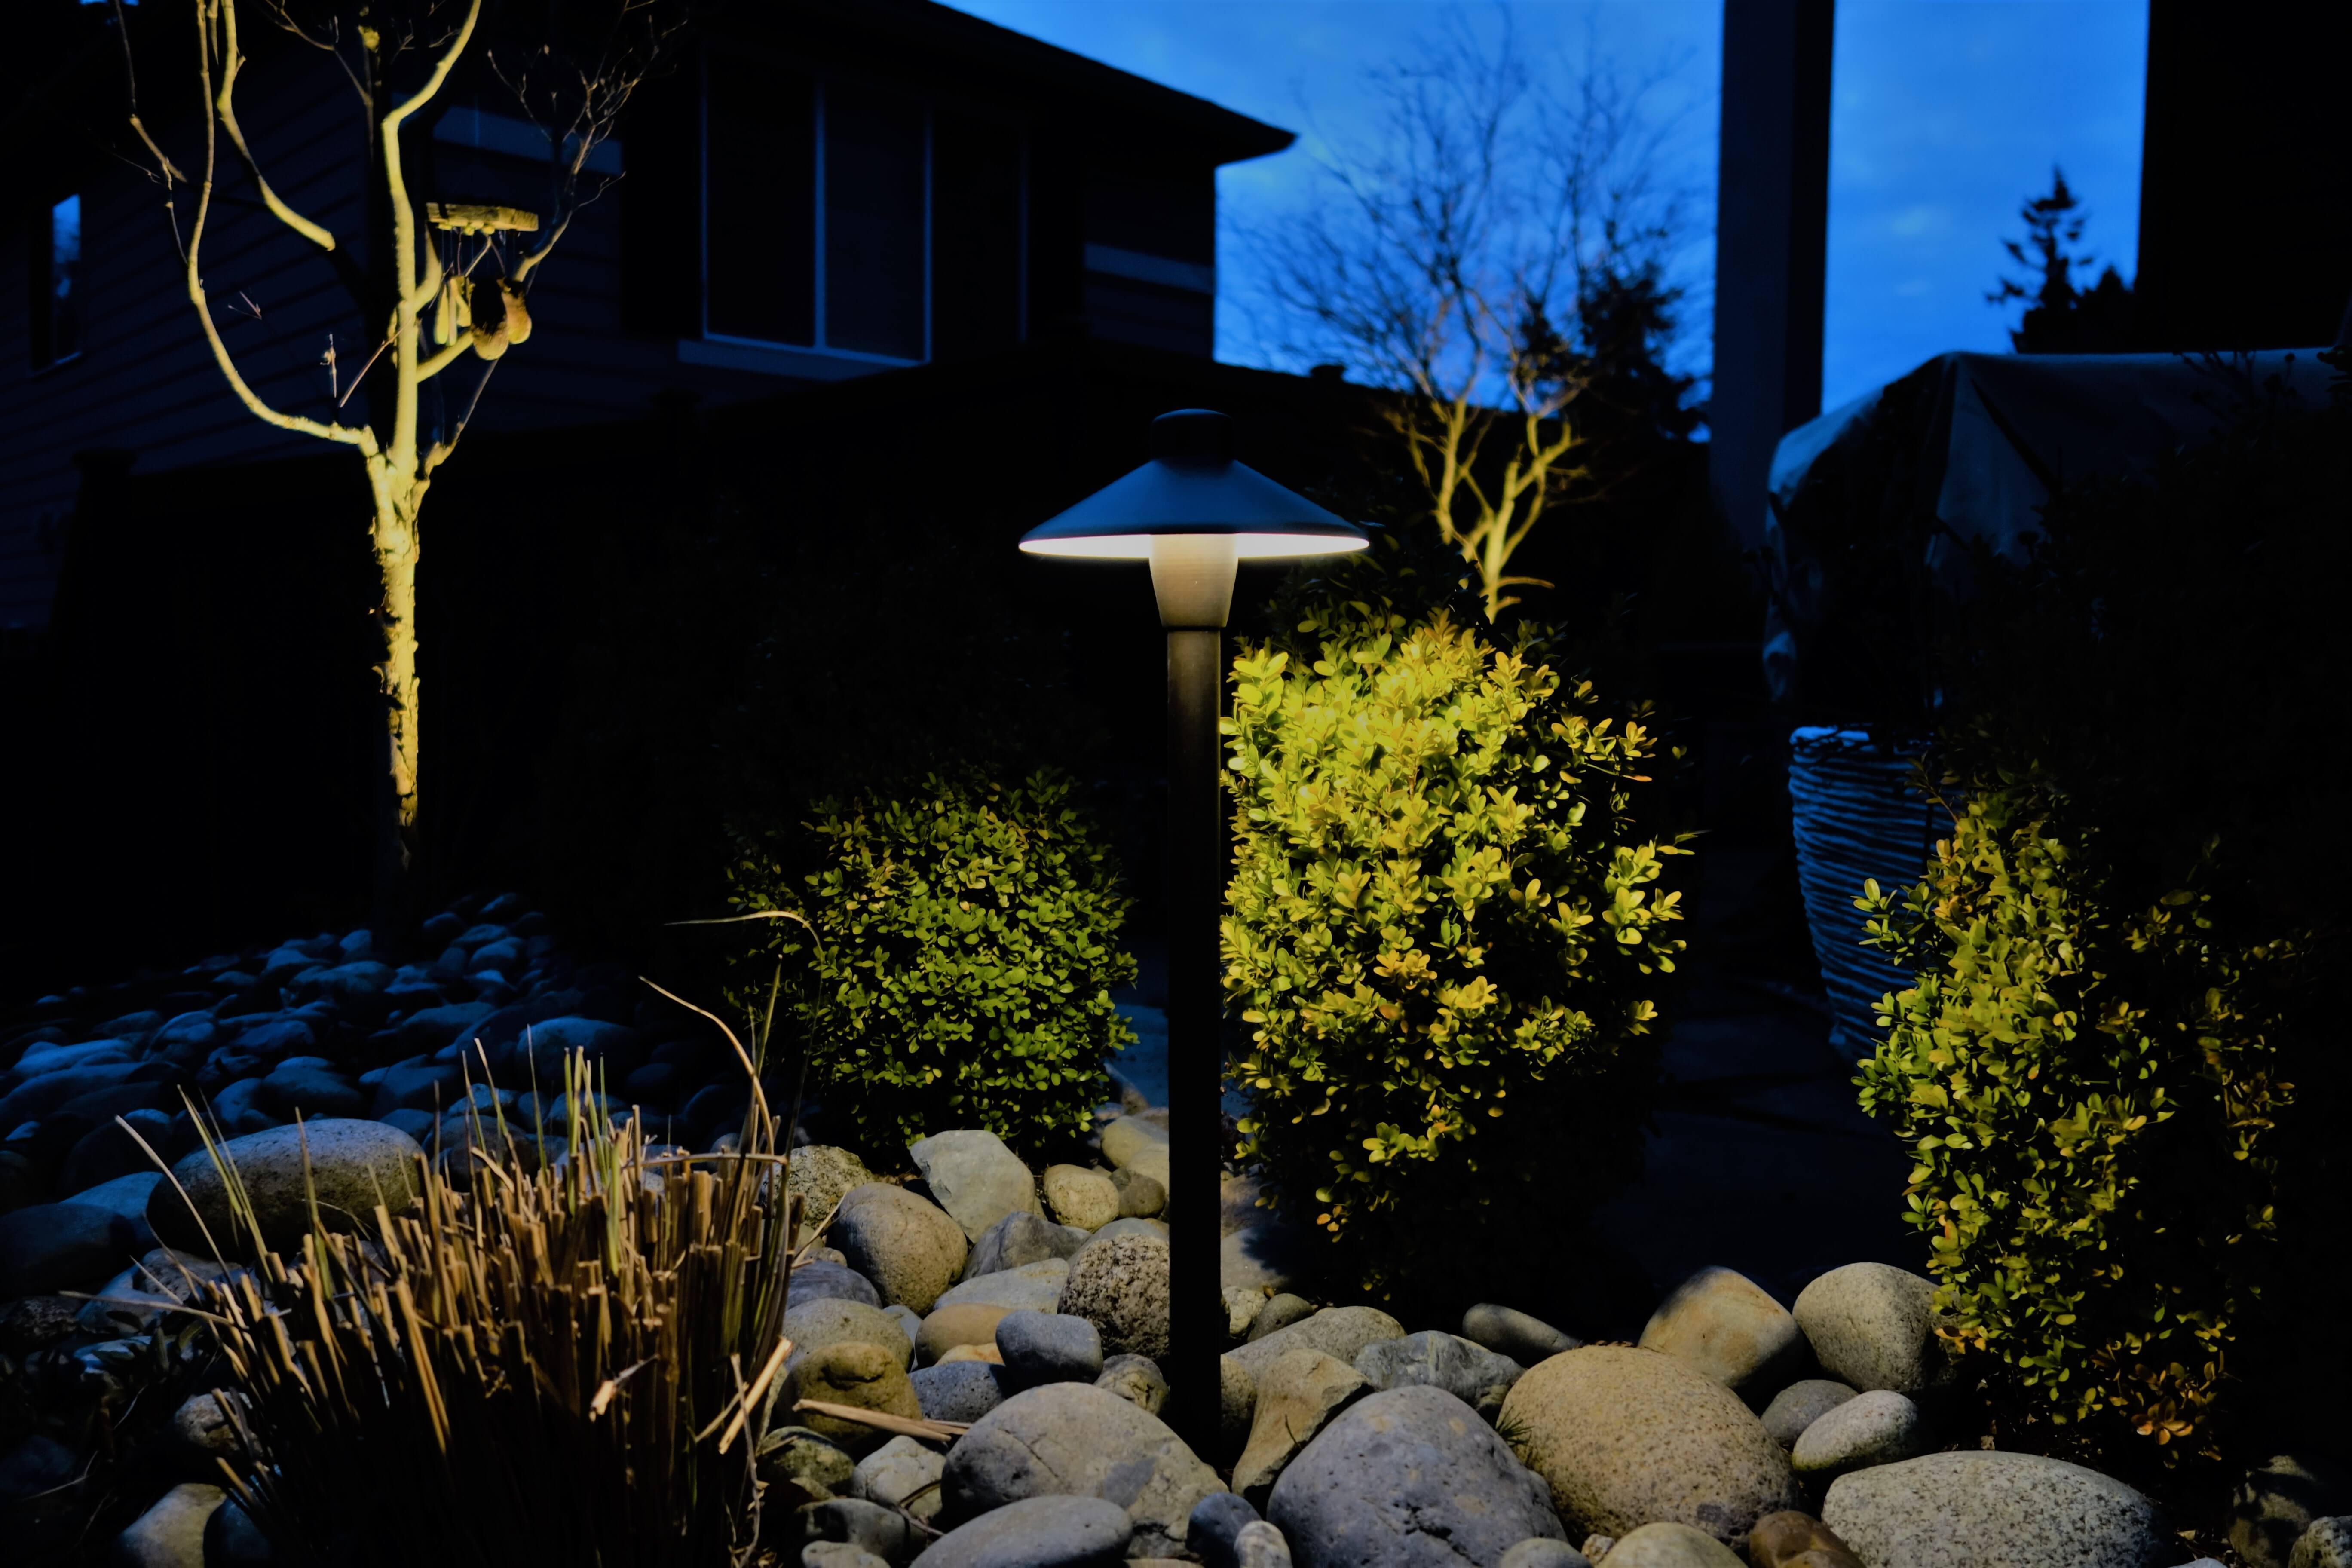 A garden with trees and rocks with special landscape lighting